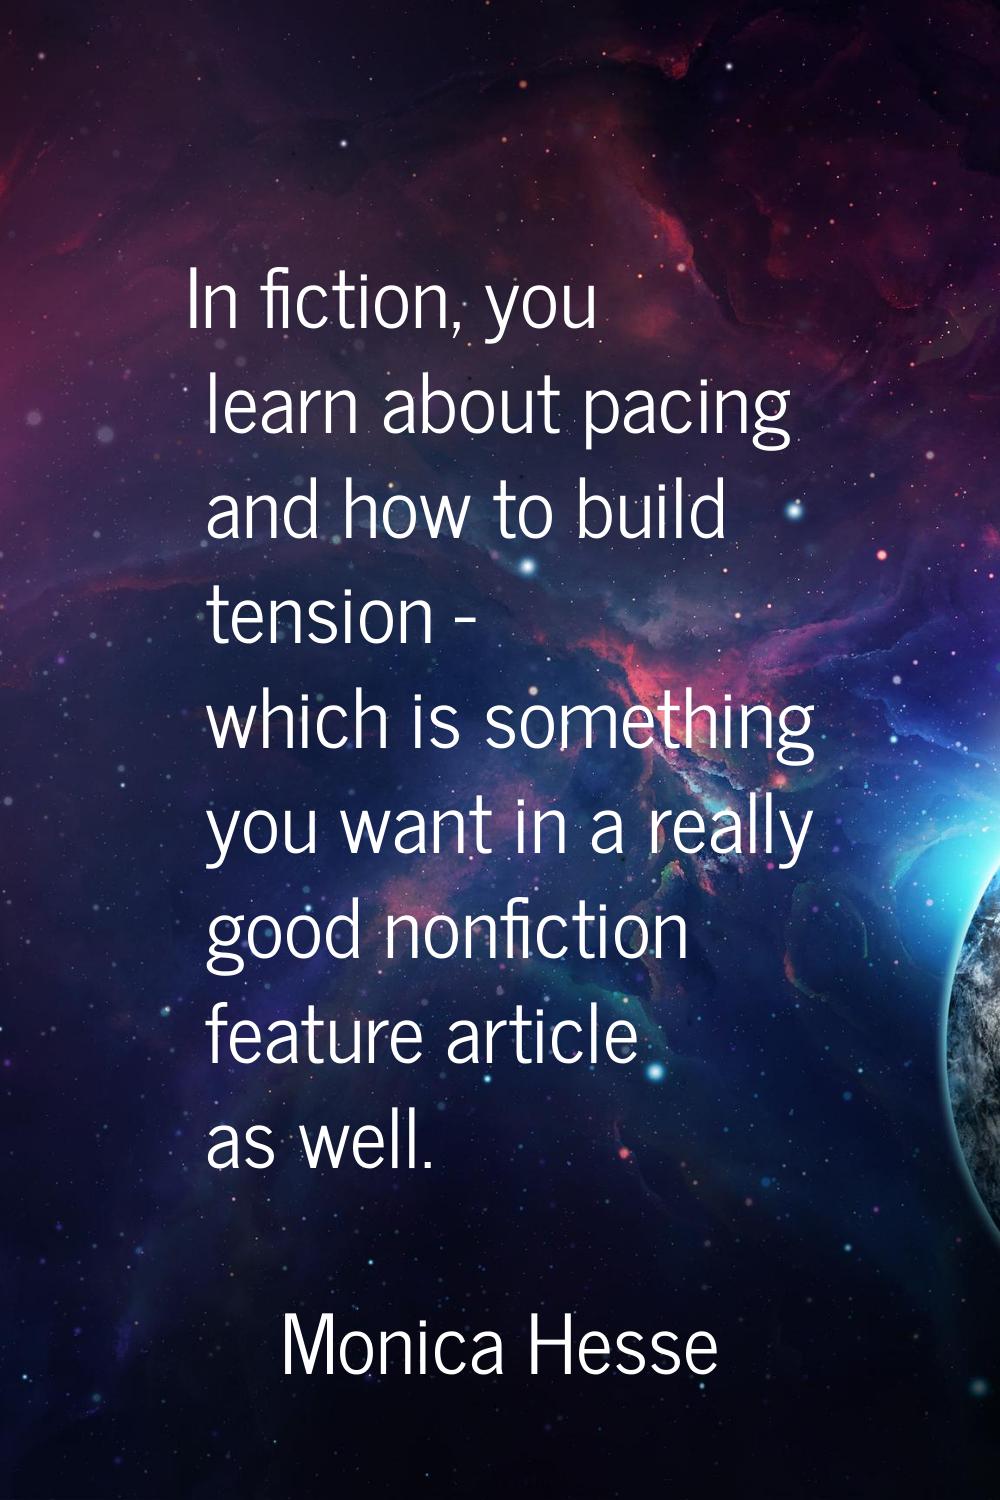 In fiction, you learn about pacing and how to build tension - which is something you want in a real